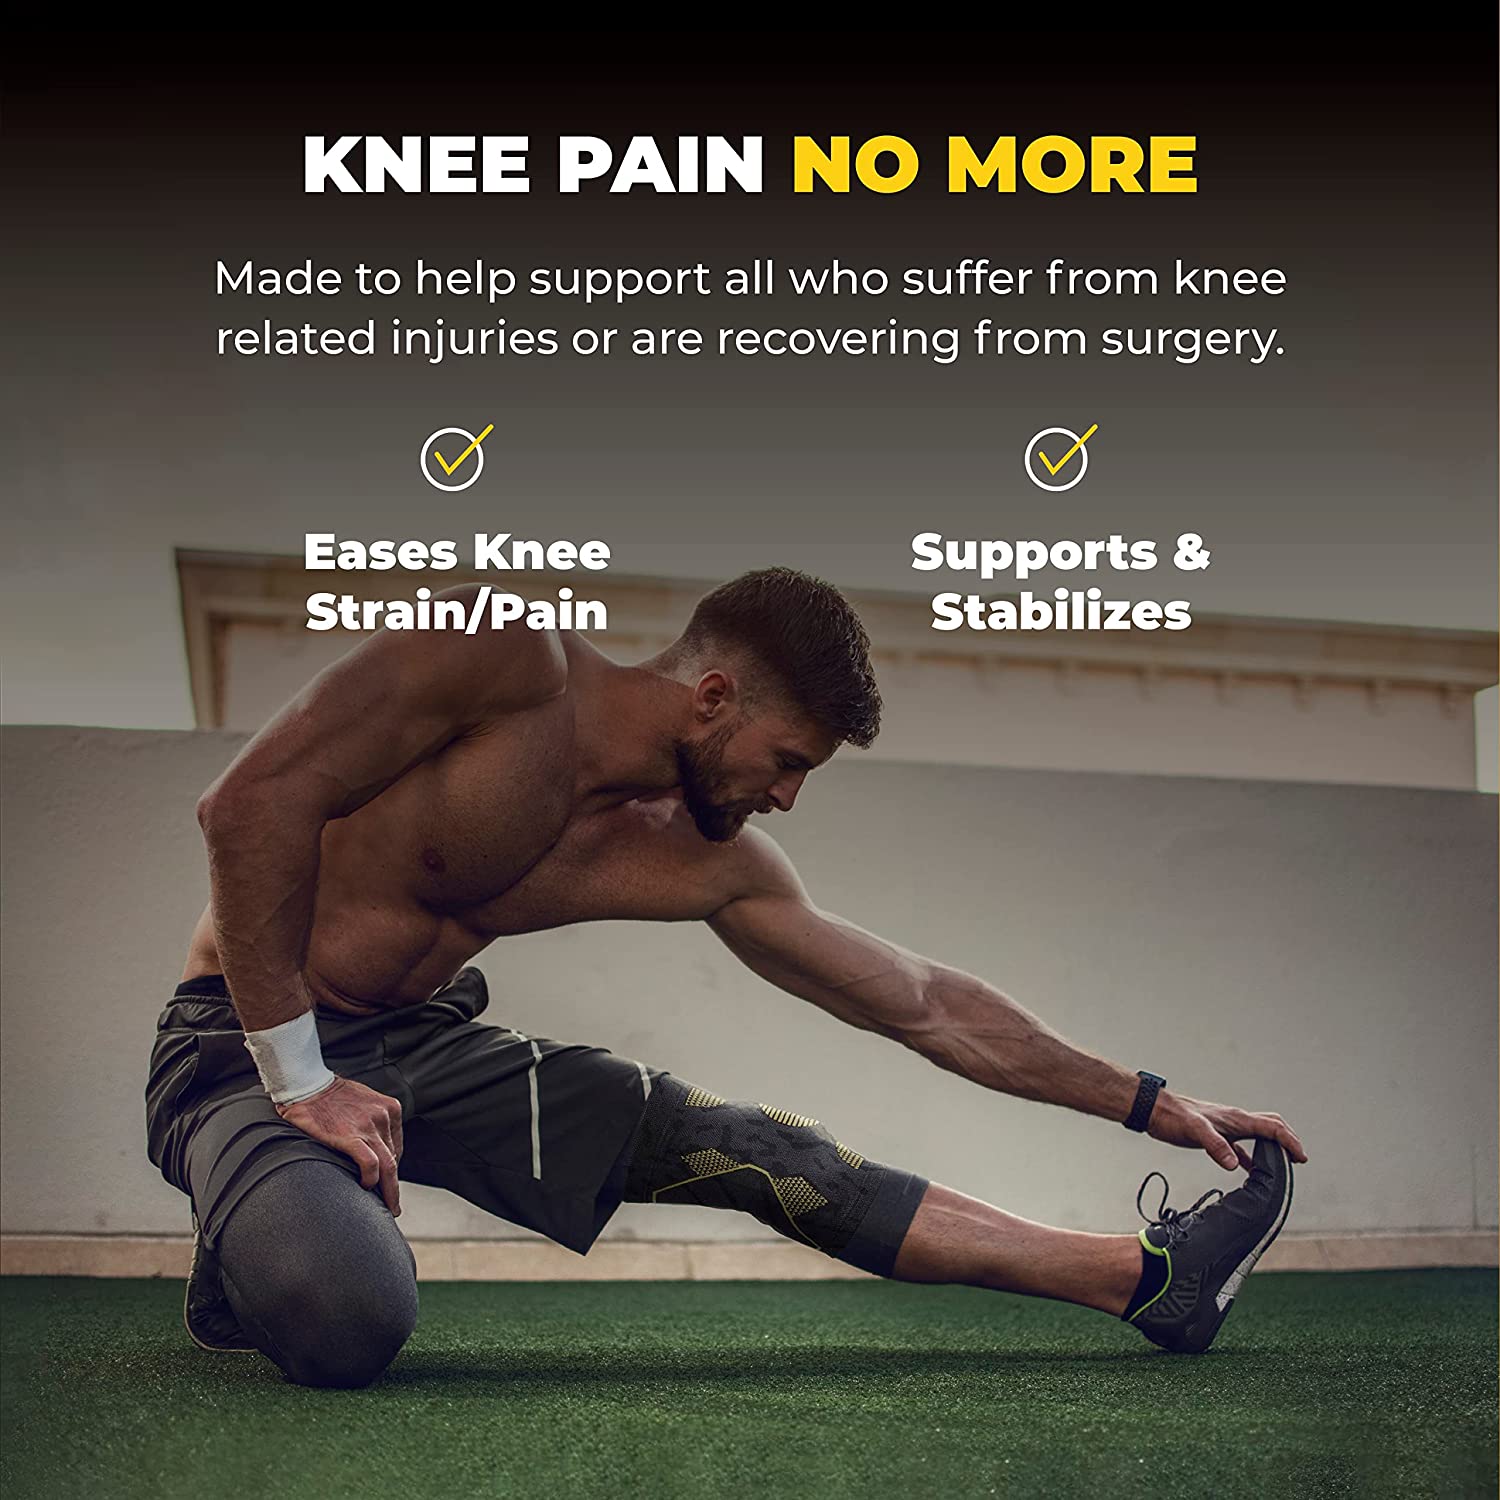 New Knee Sleeve Provides Great Knee Support For People With Knee Issues